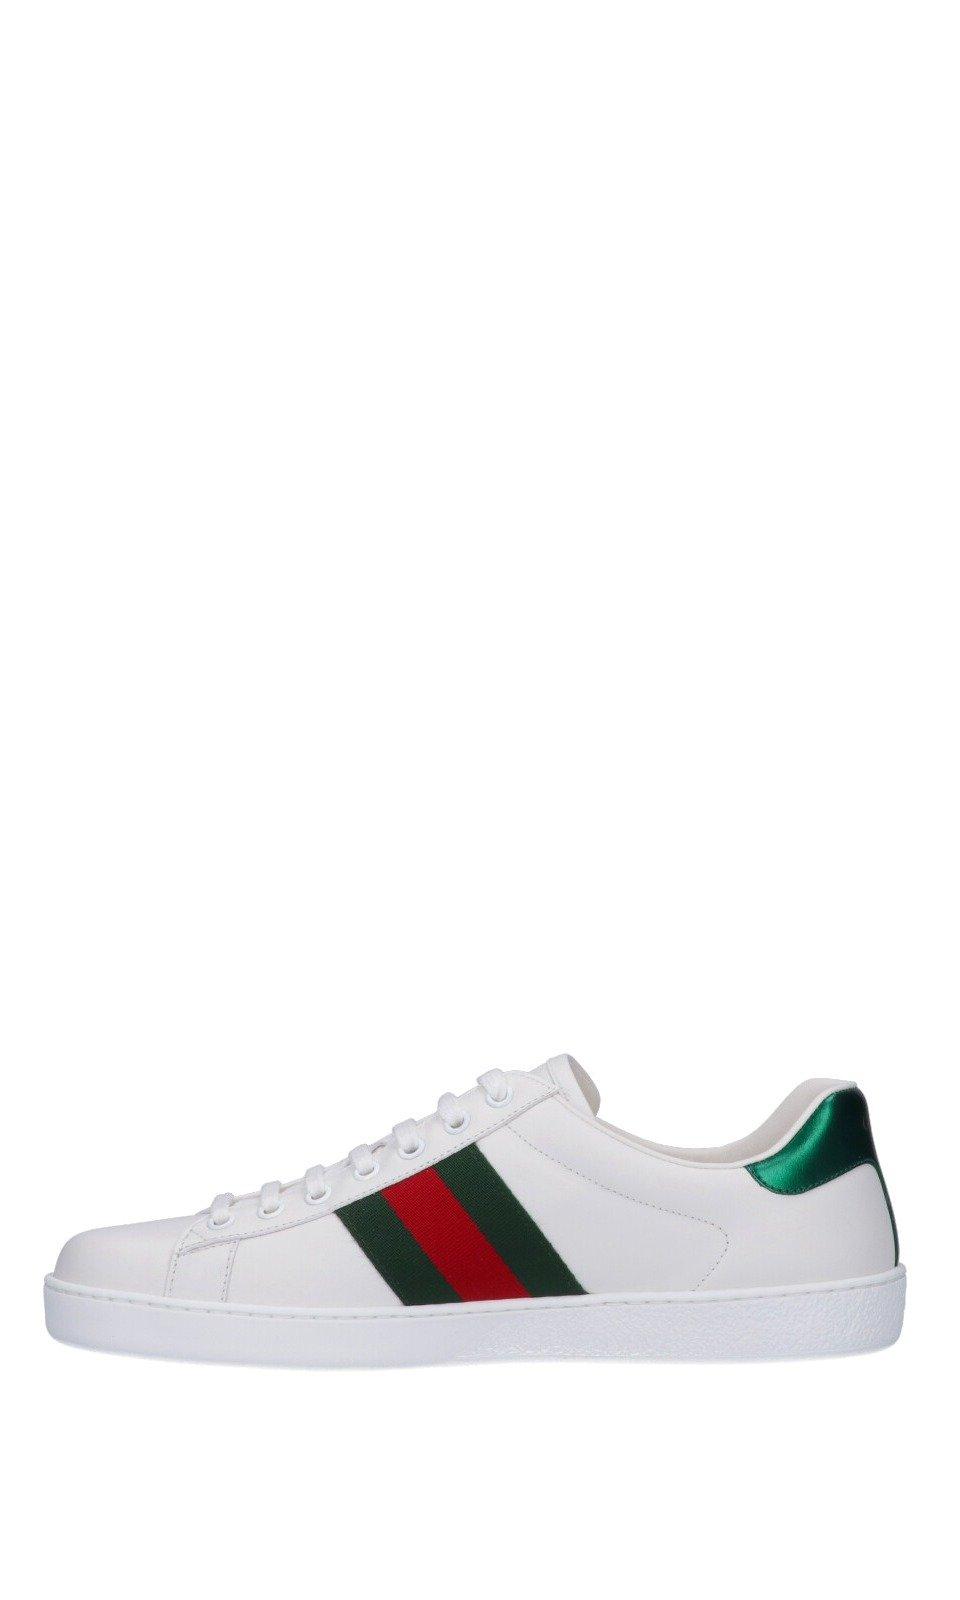 Gucci Leather Ace Sneakers in White for Men - Lyst